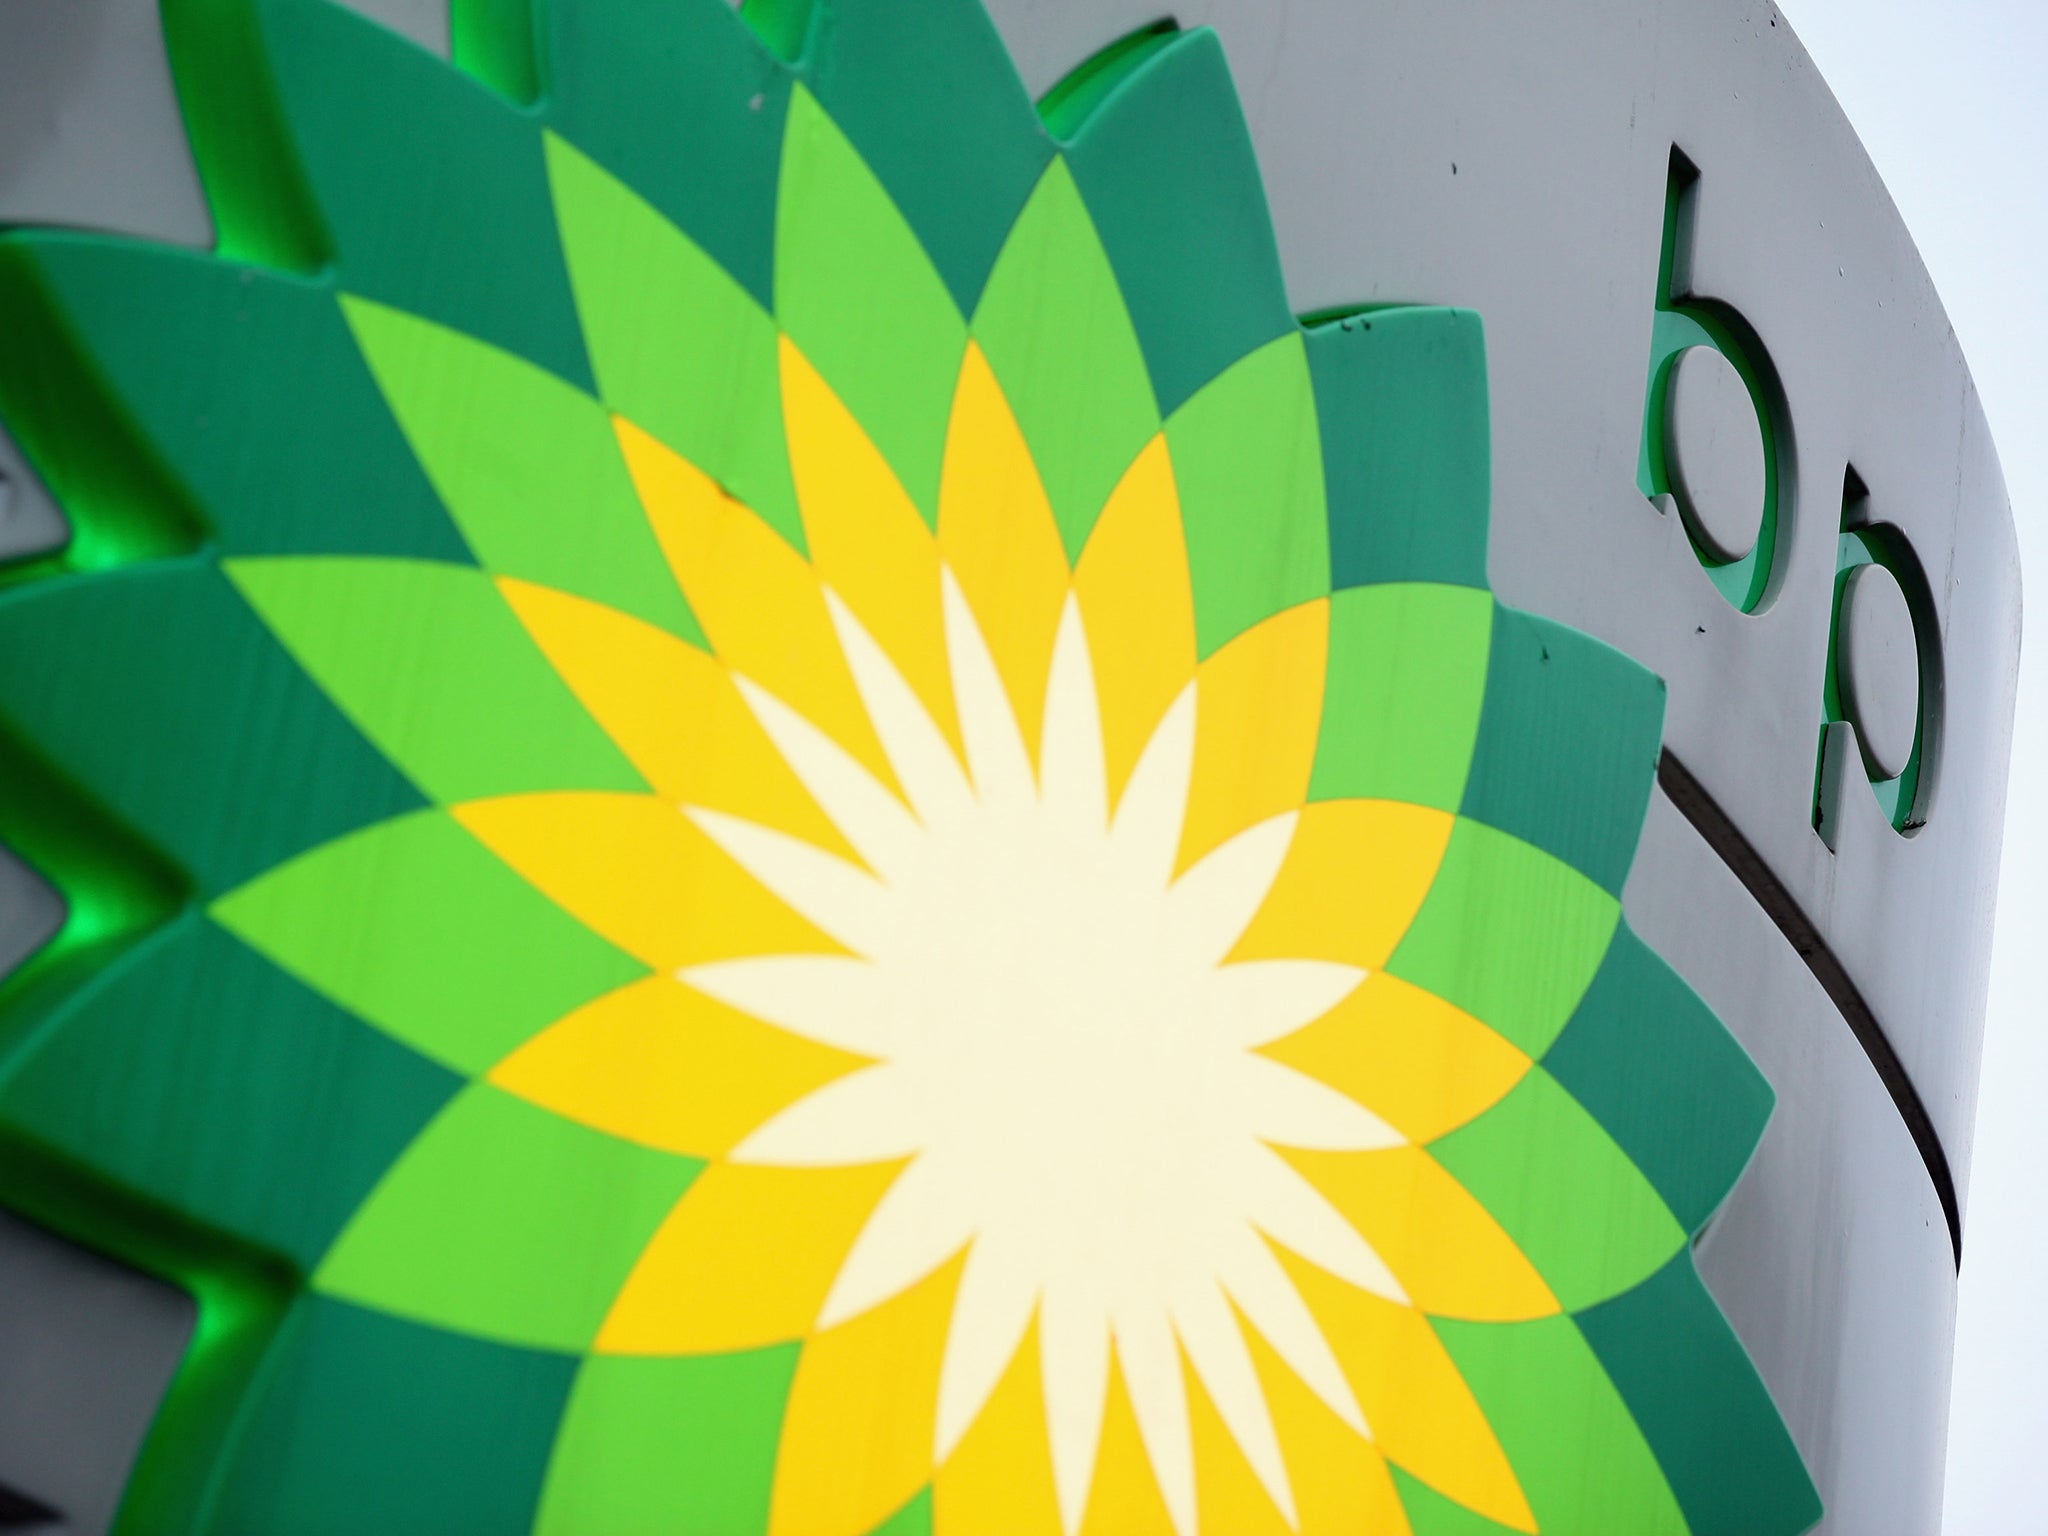 The Church wants BP and Shell to take greater action to tackle the threat of global warming